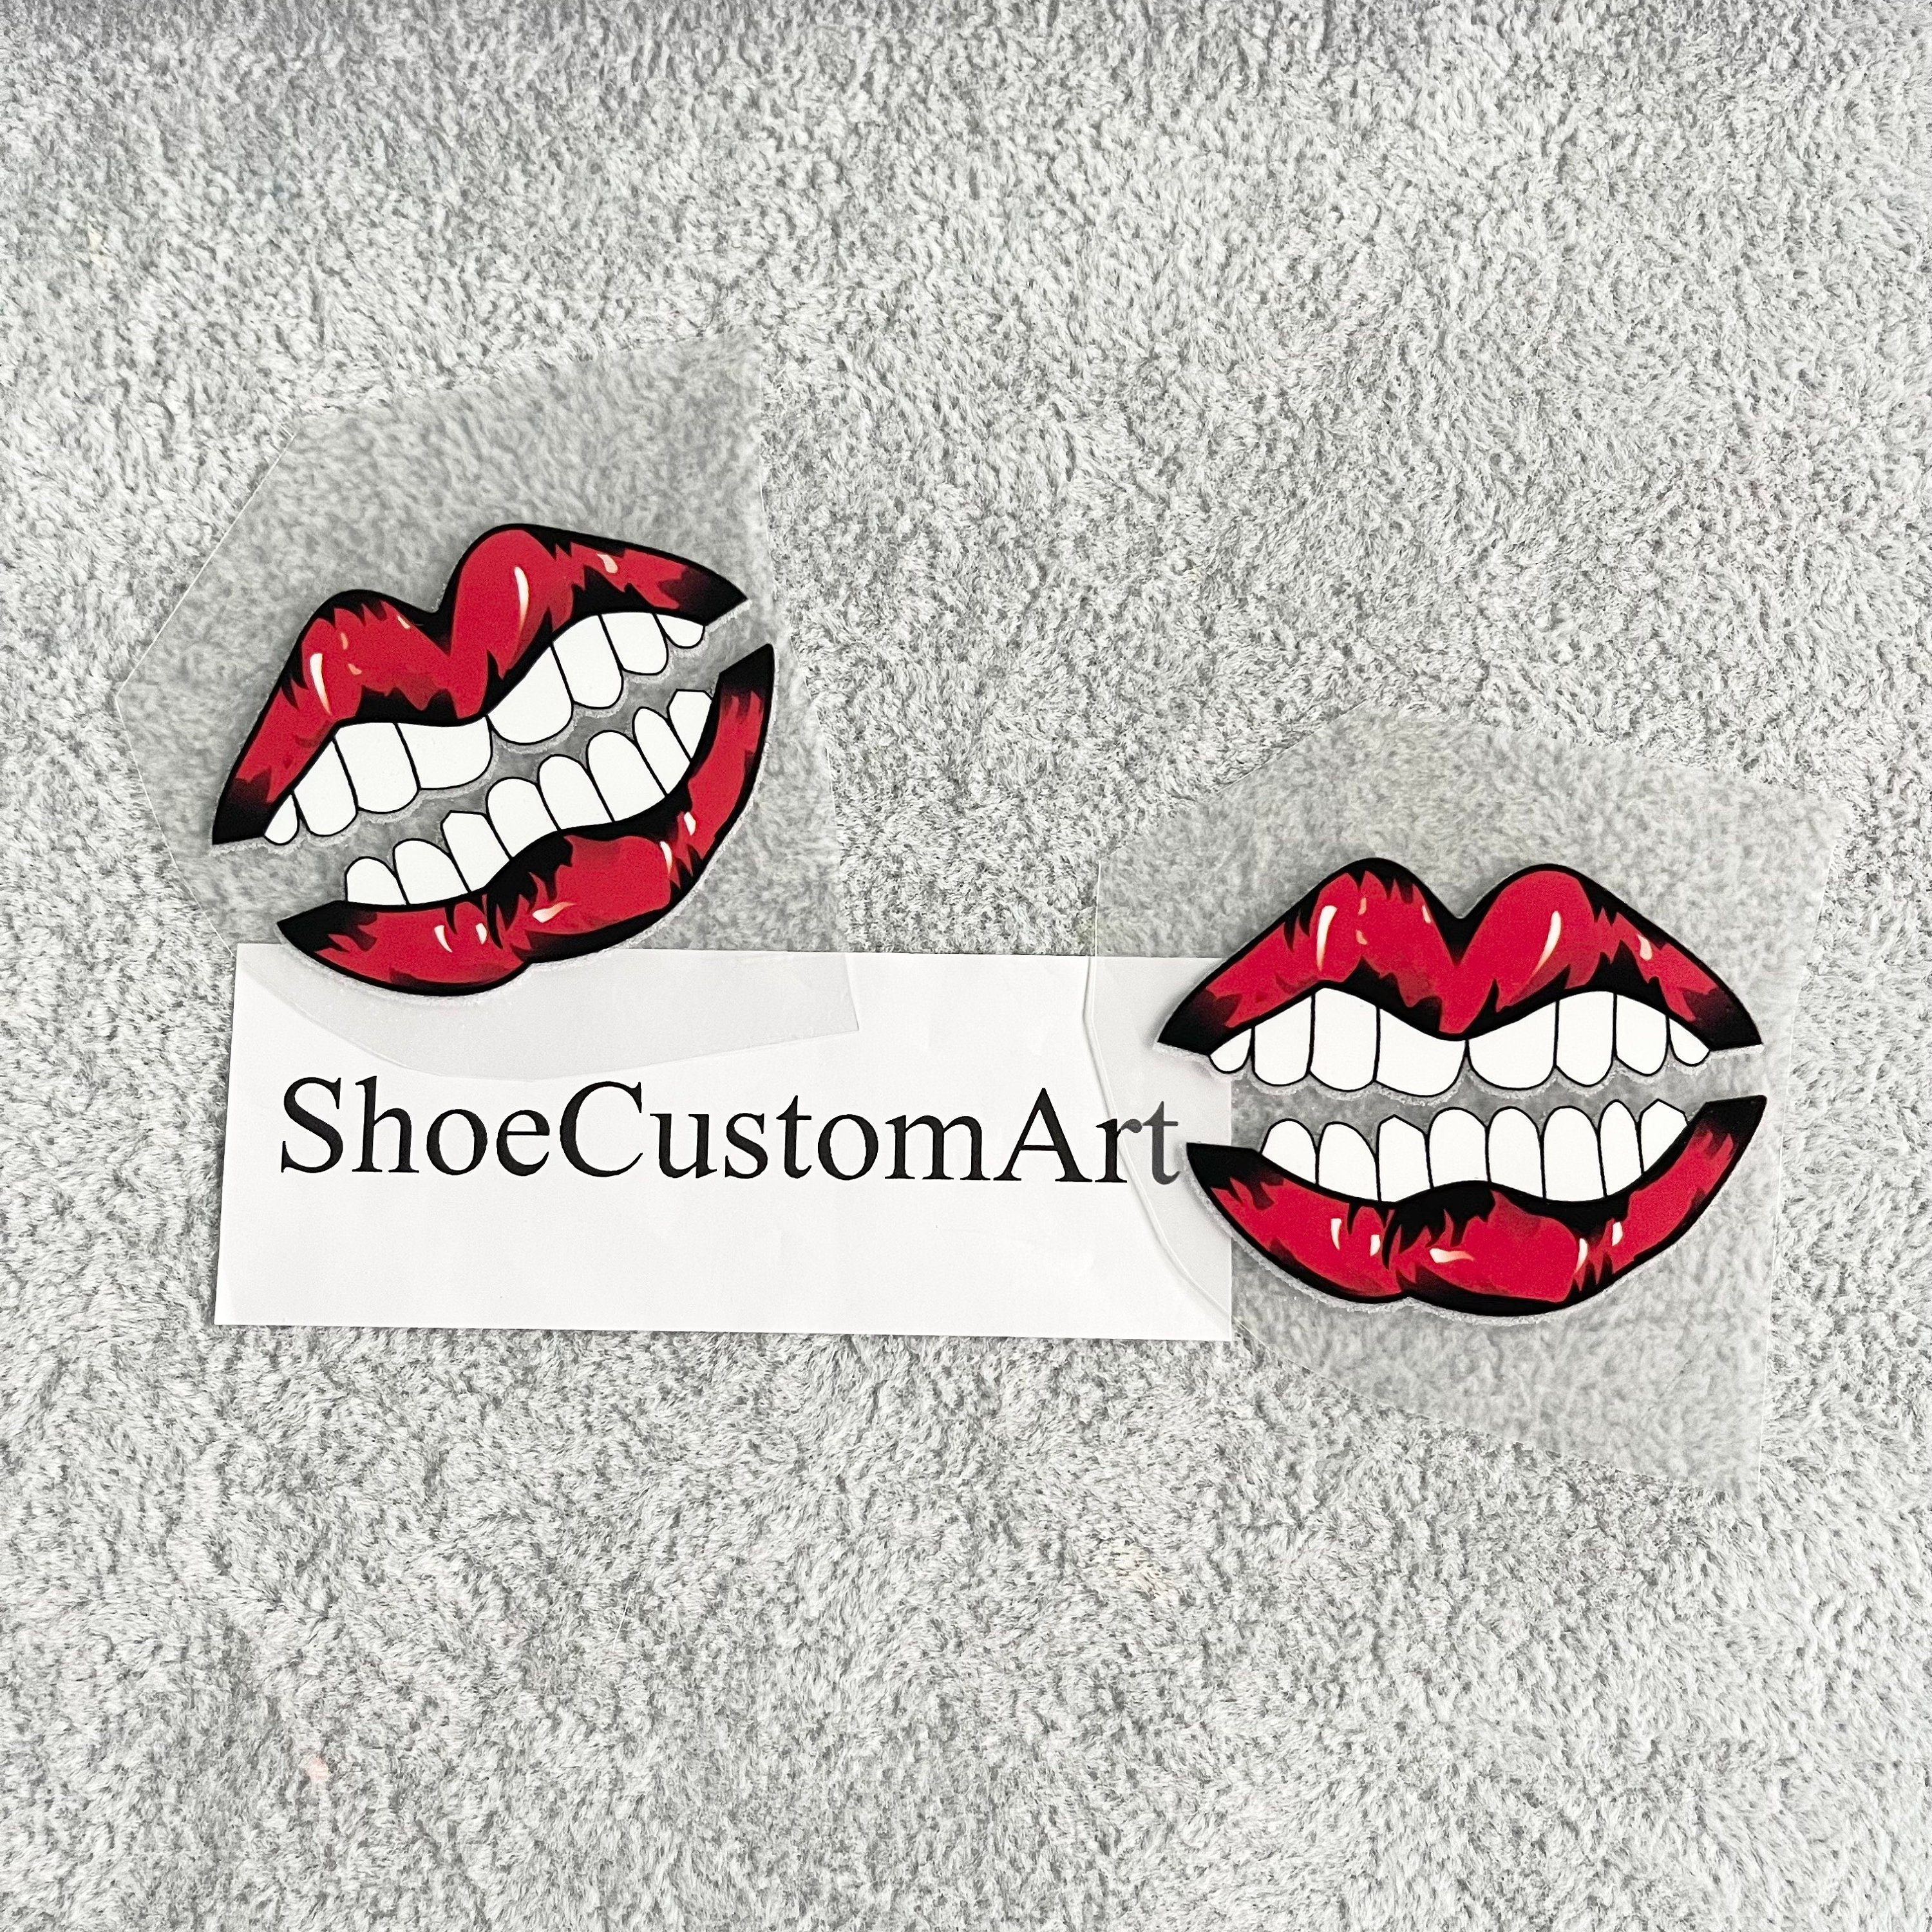 Promesa Roble golpear Set of 2 Red Lips Biting Teeth Transfer Stickers for Custom - Etsy